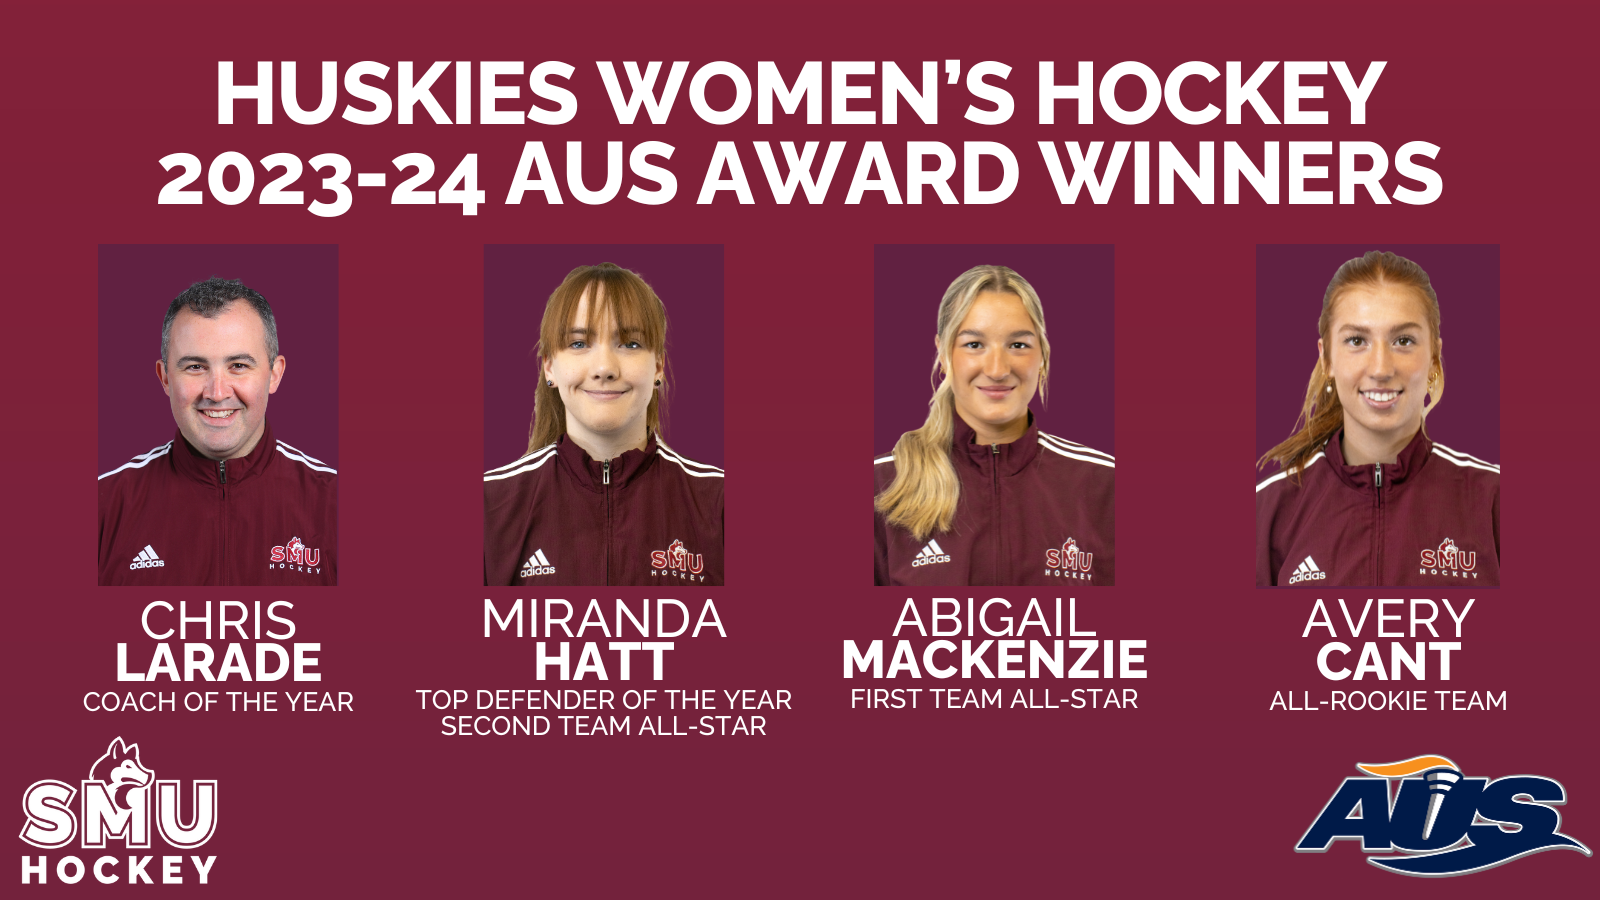 Larade named Coach of the Year; Hatt, MacKenzie and Cant honoured with AUS Awards